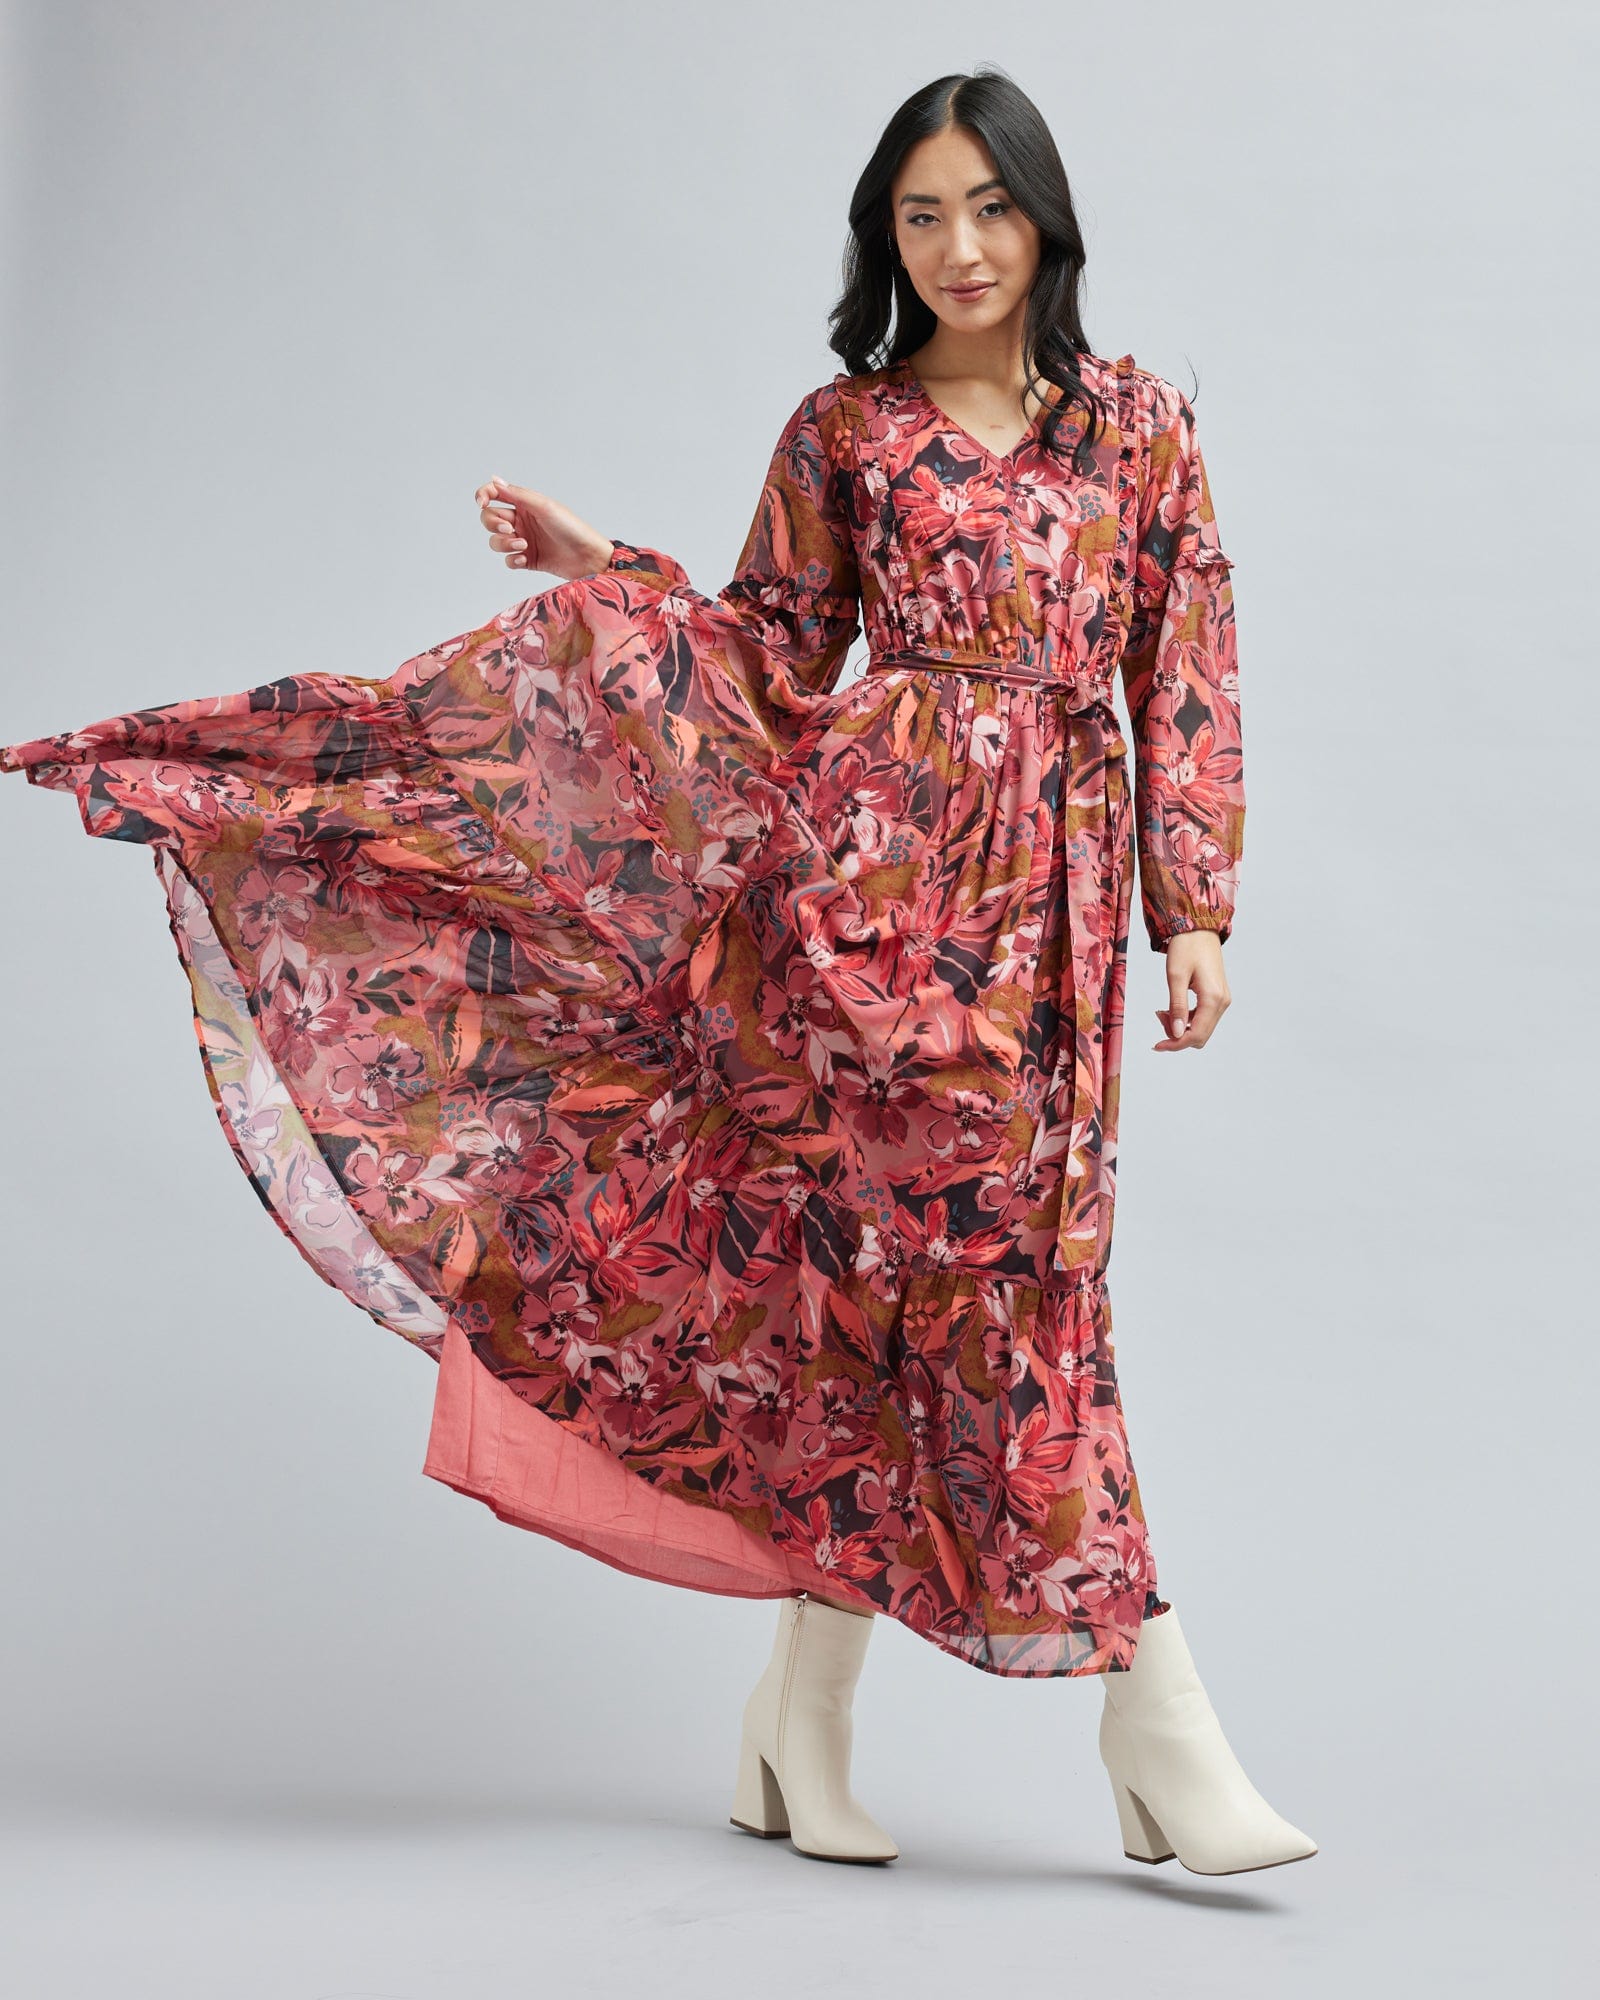 Woman in a long sleeve, floral print, maxi dress